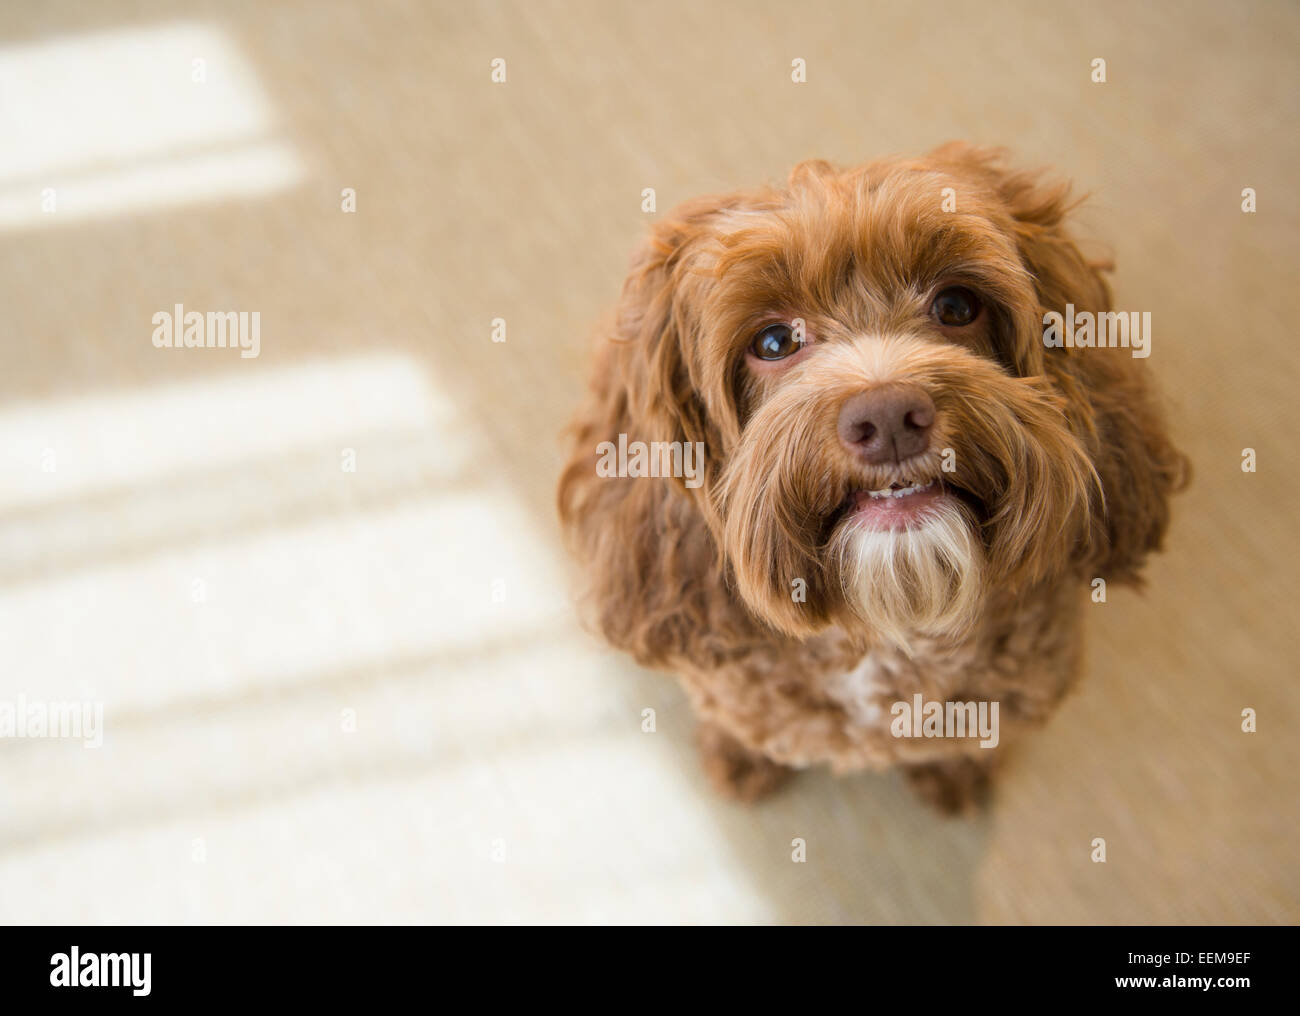 Close up of face of obedient dog Stock Photo